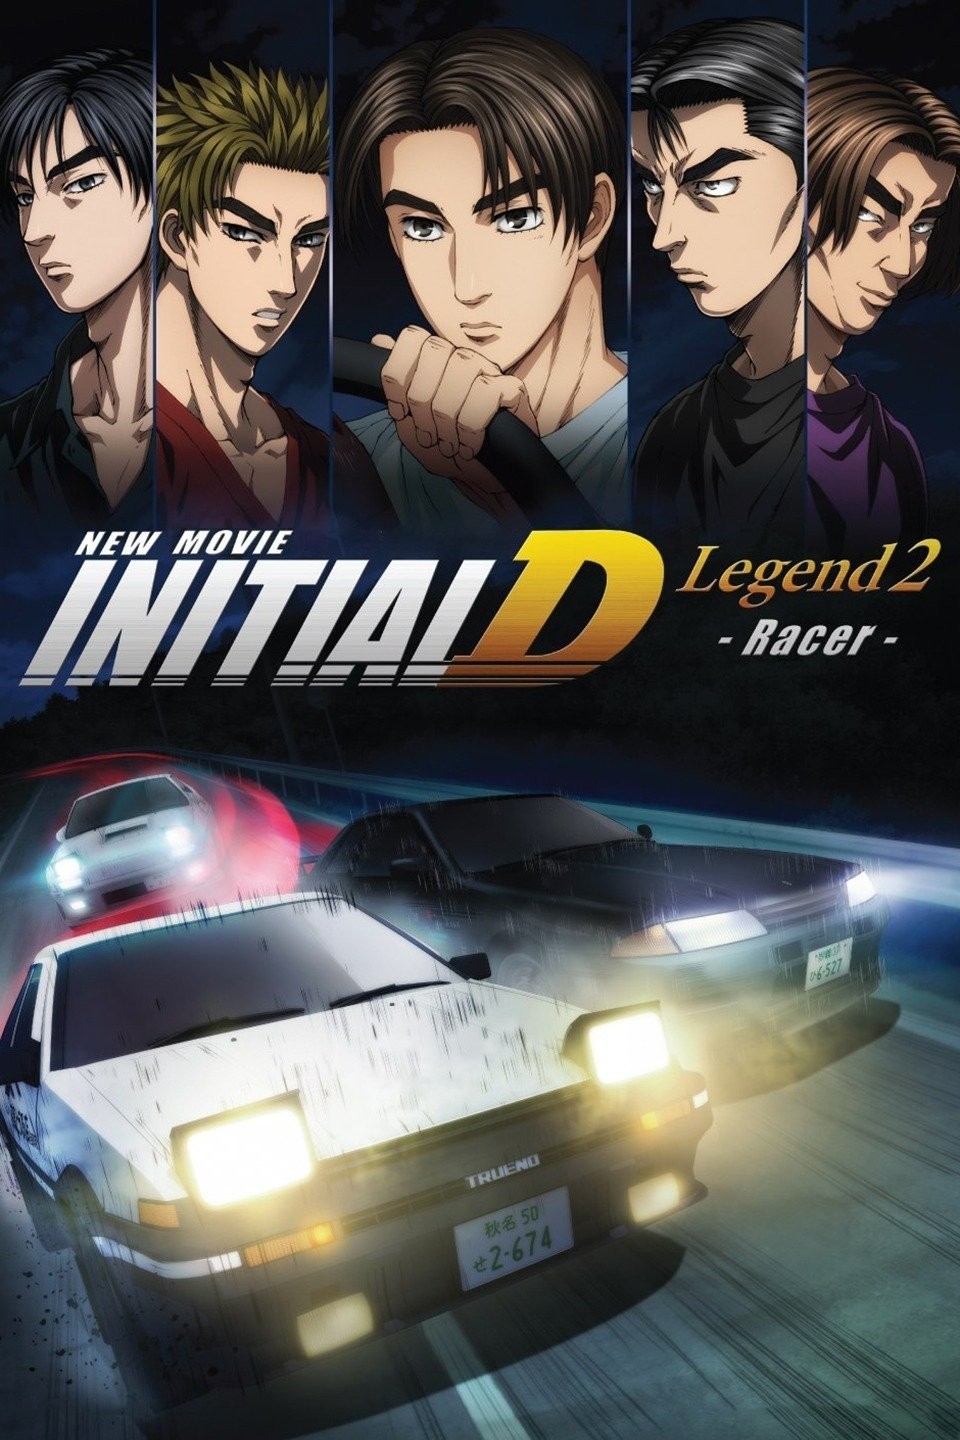 New Initial D the Movie: Legend 2 -- Racer